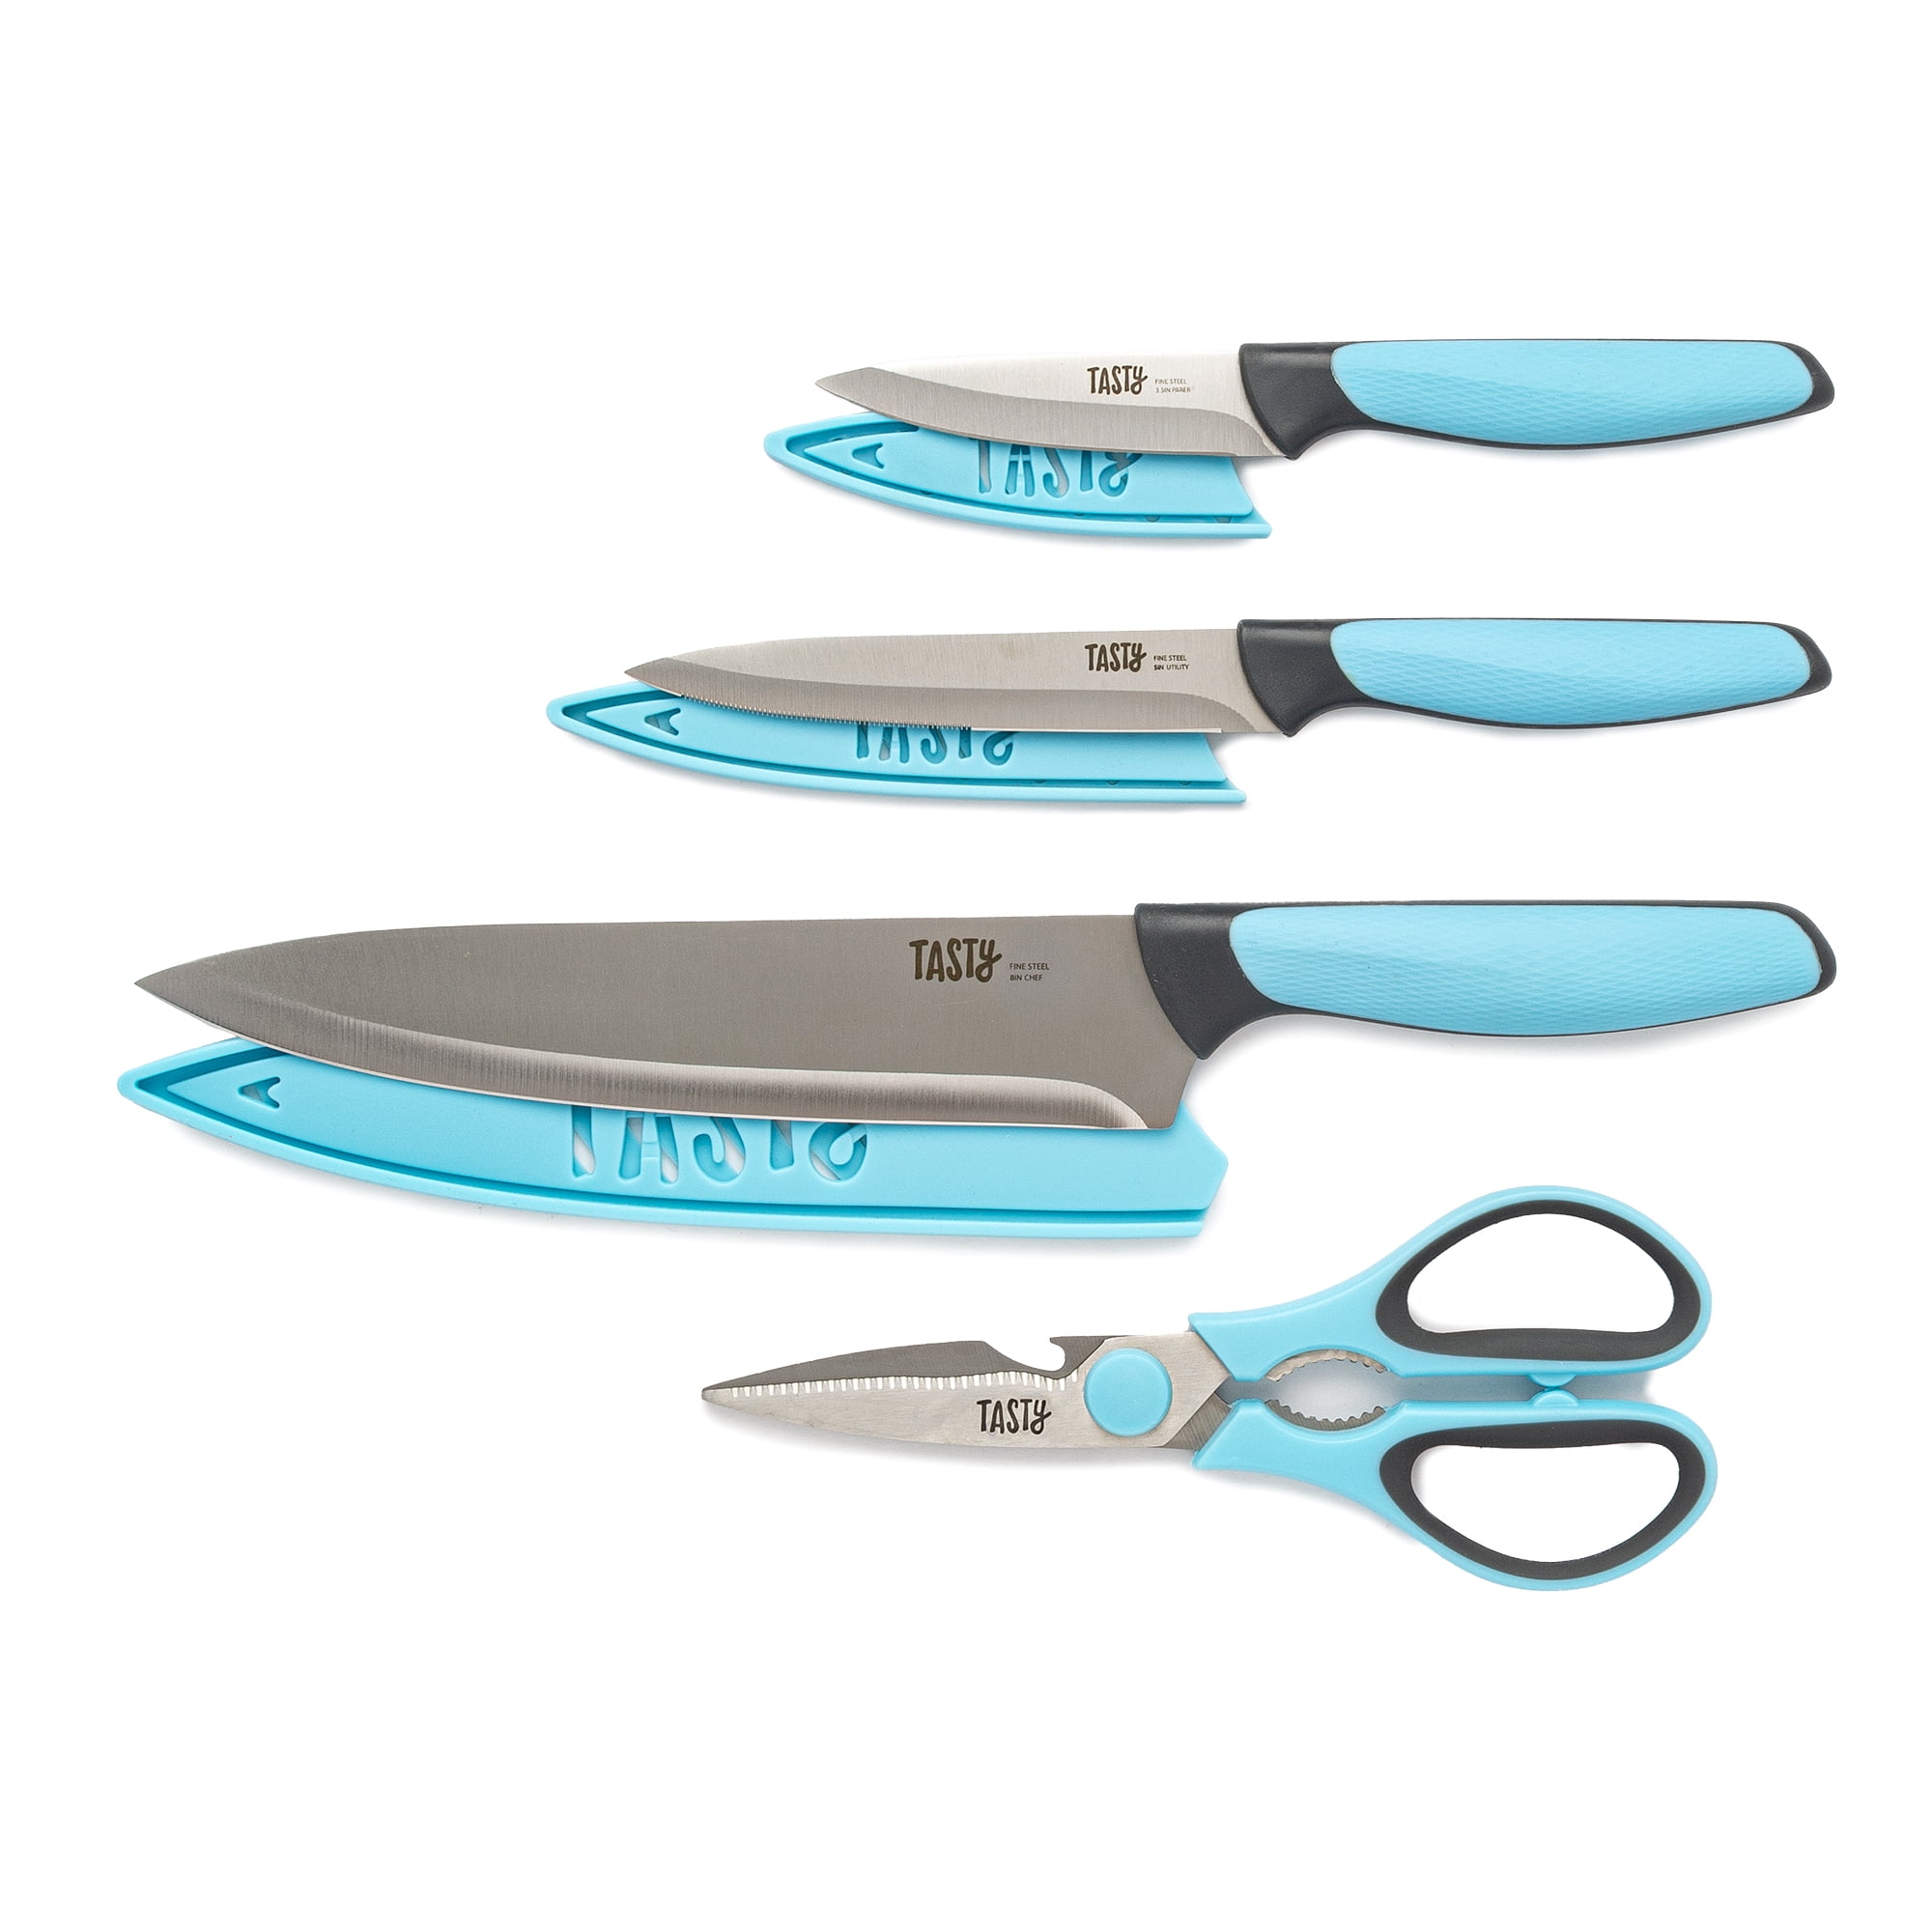 Tasty Cutlery Knife Set with Shears, Stainless Steel, Blue, 4 Piece